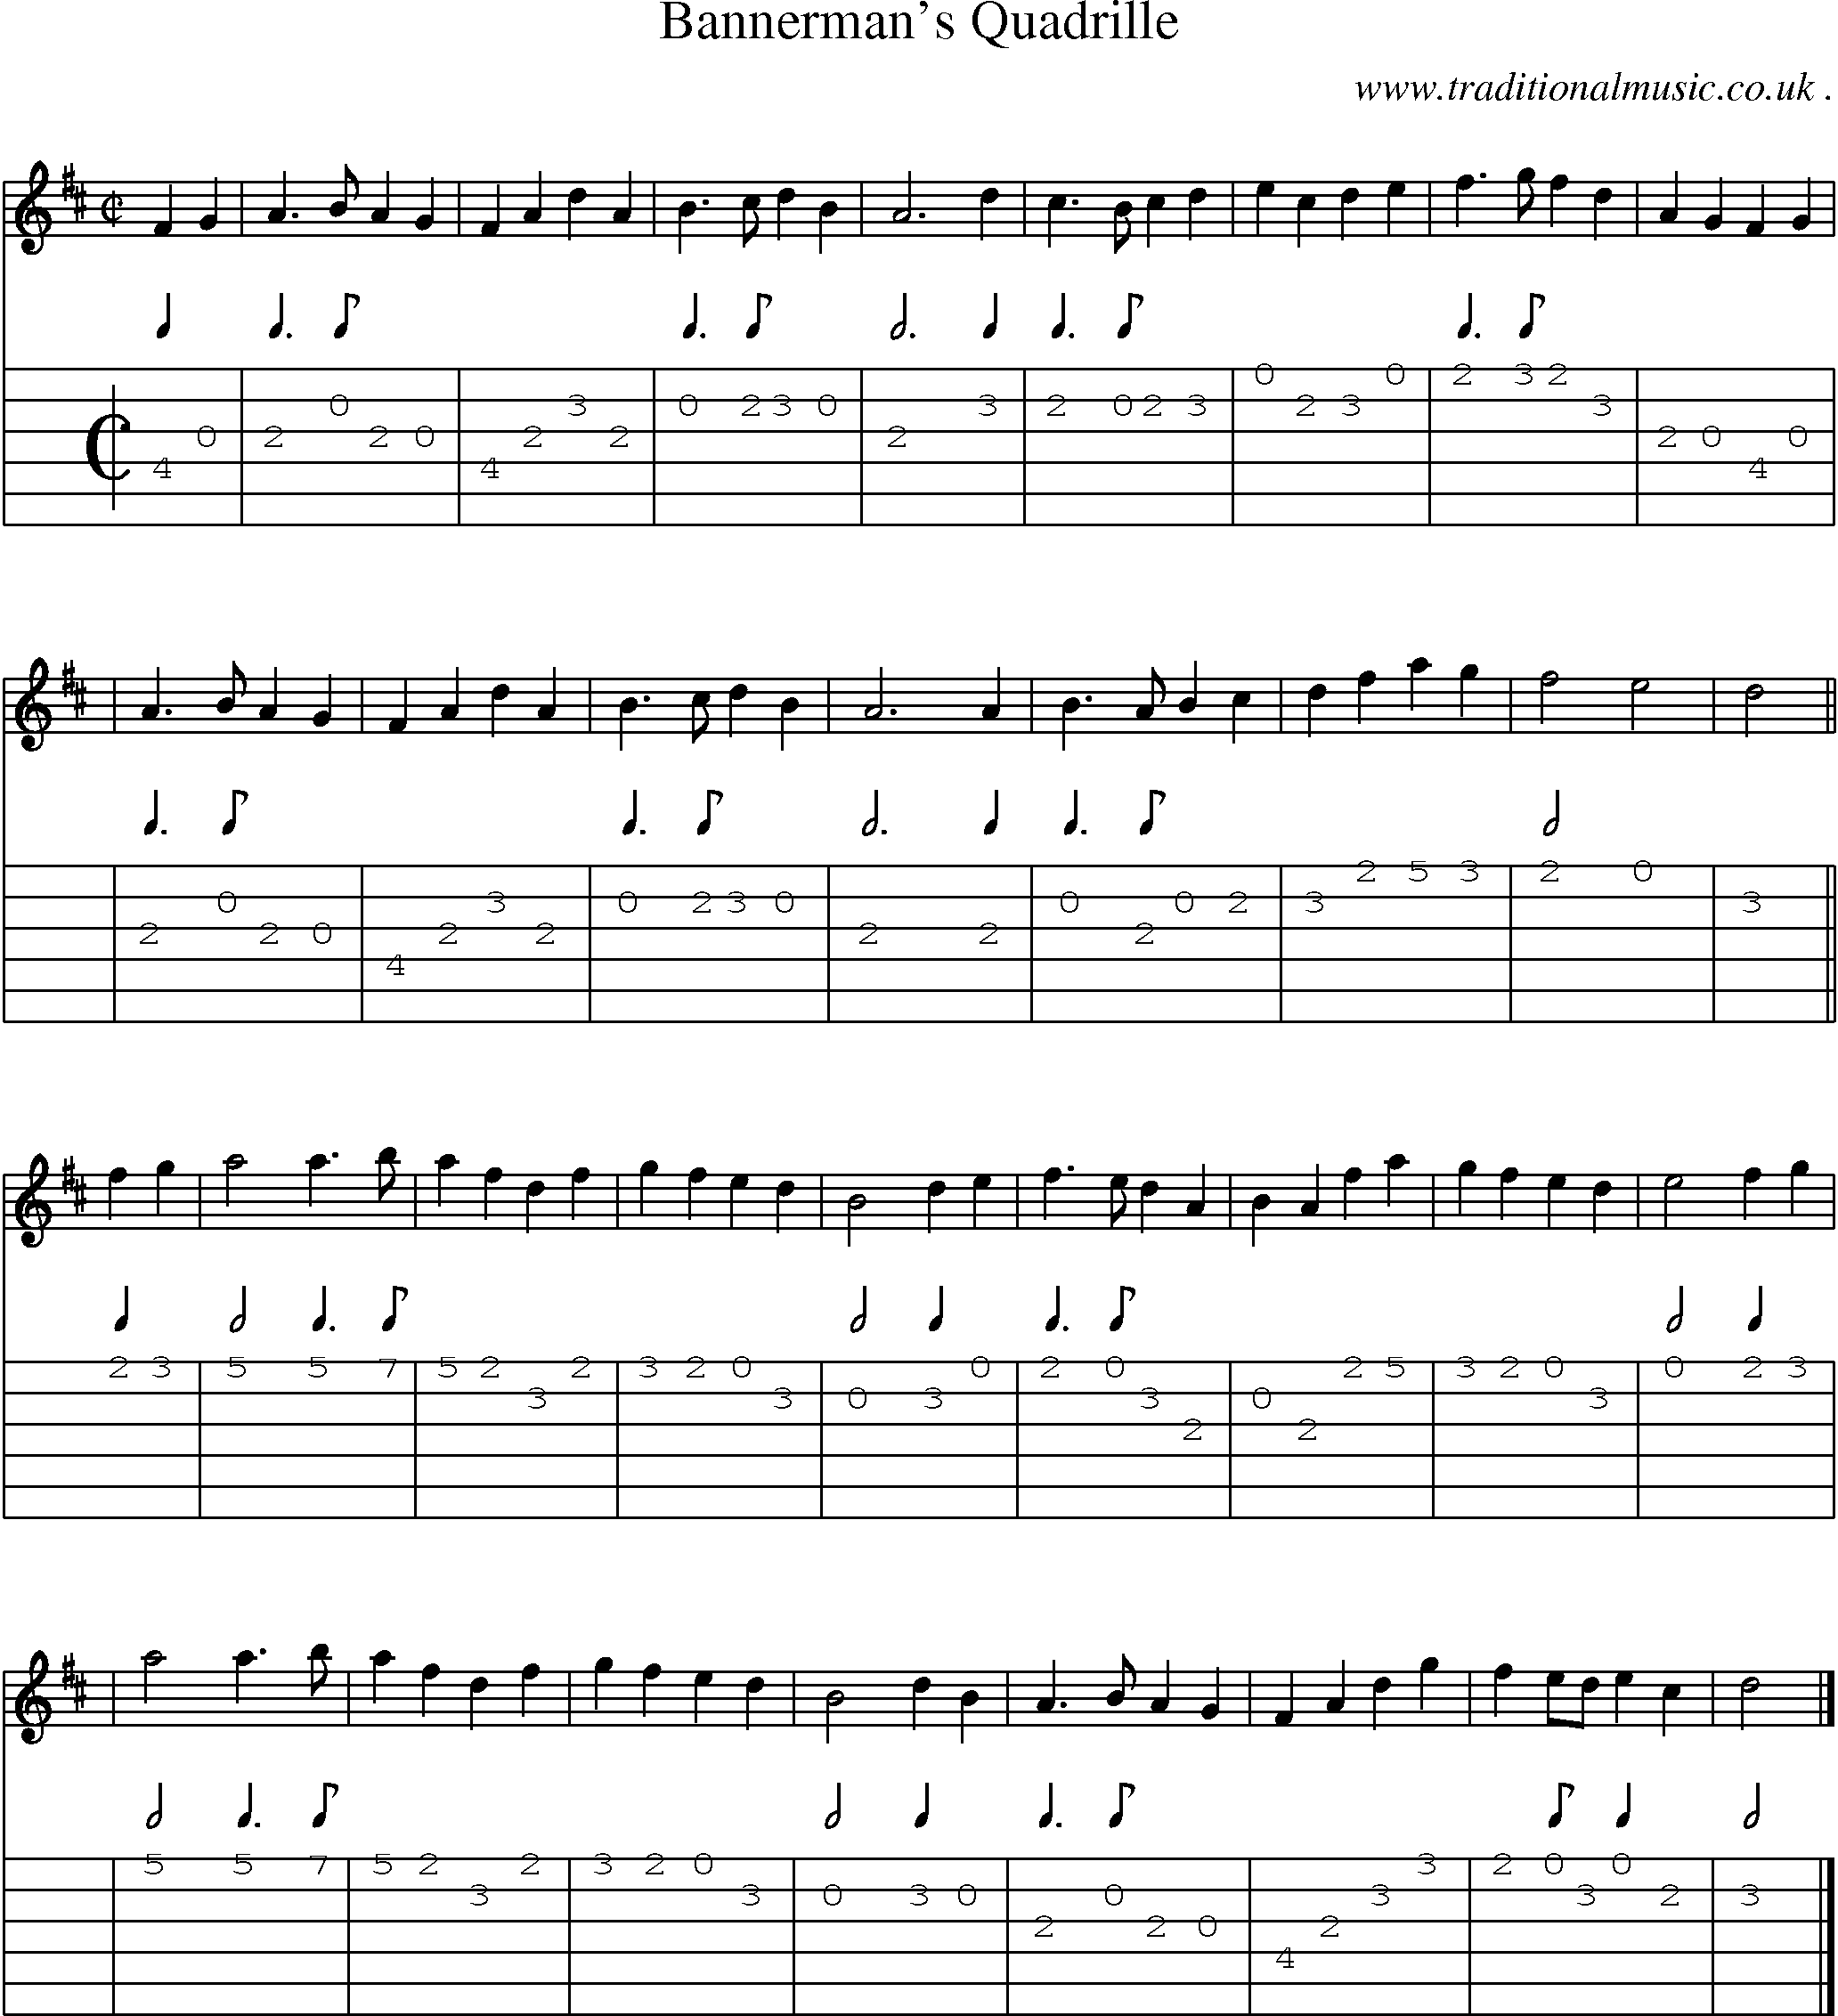 Sheet-music  score, Chords and Guitar Tabs for Bannermans Quadrille